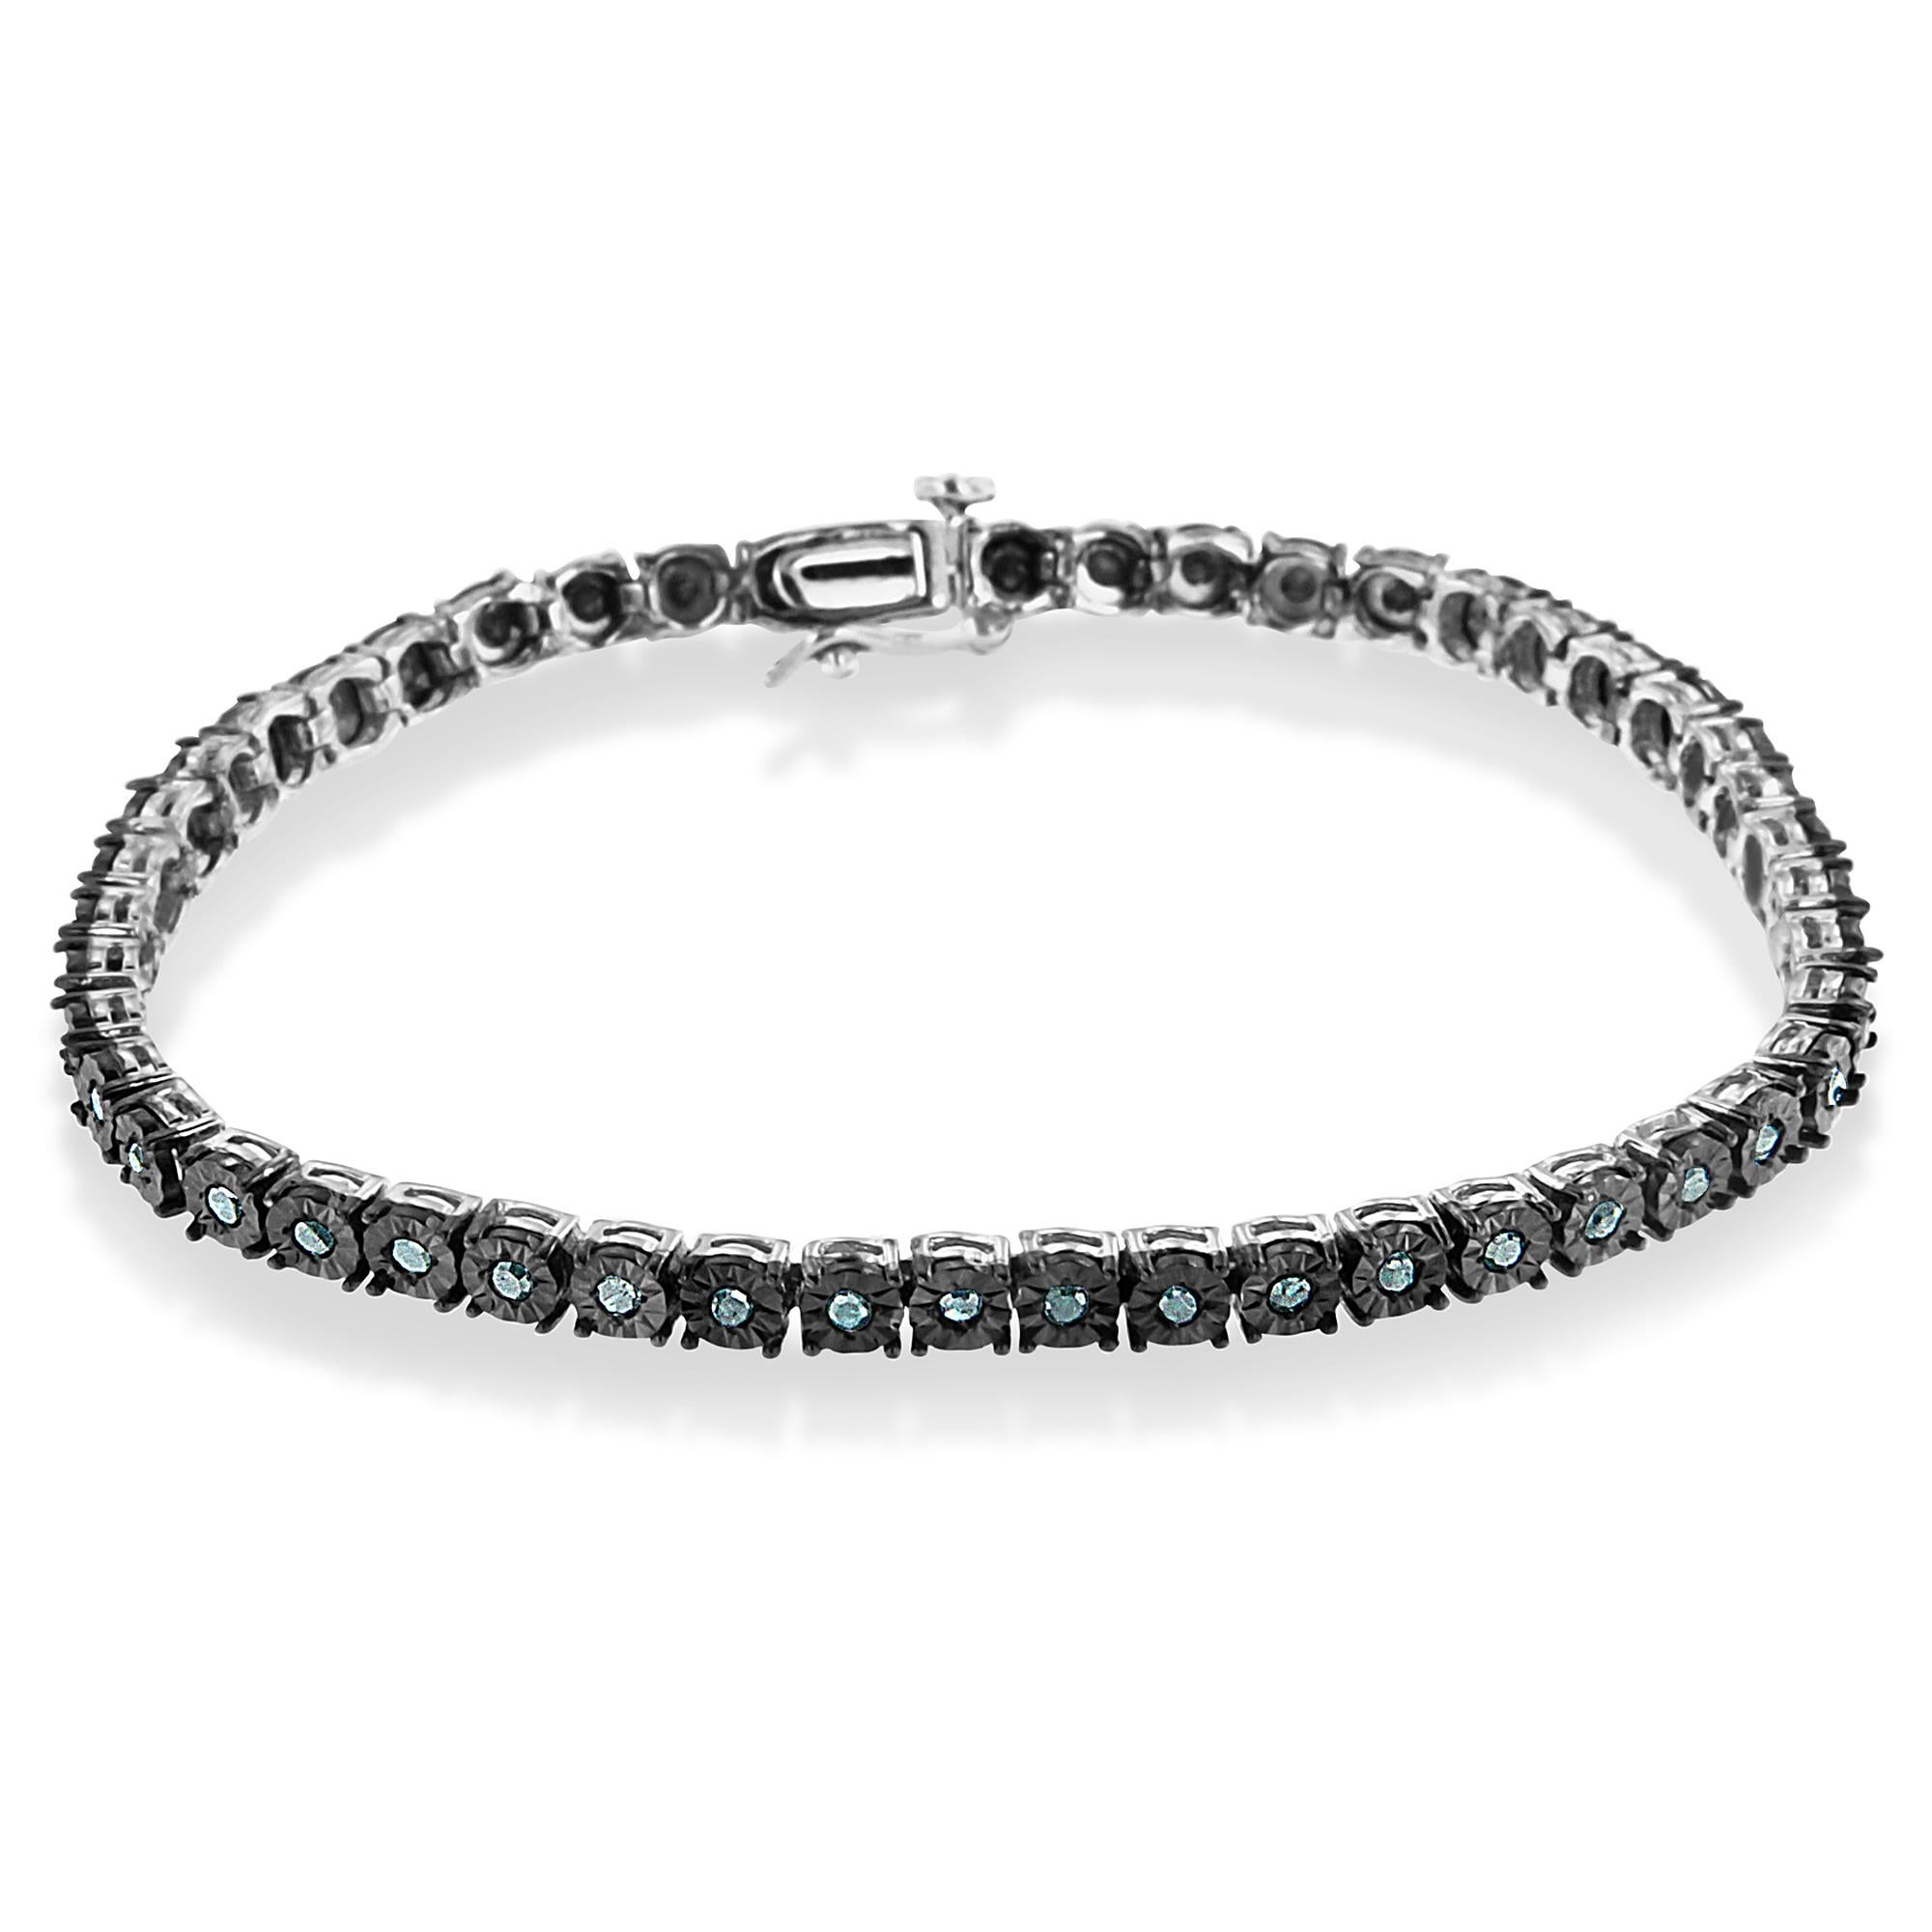 This feminine tennis bracelet is made up of the most lovely, multifaceted blue colored rose cut diamonds, which give off a wonderful sparkle. This bracelet has 48, treated blue rose-cut, promo quality diamonds, which are on the lowest on the diamond